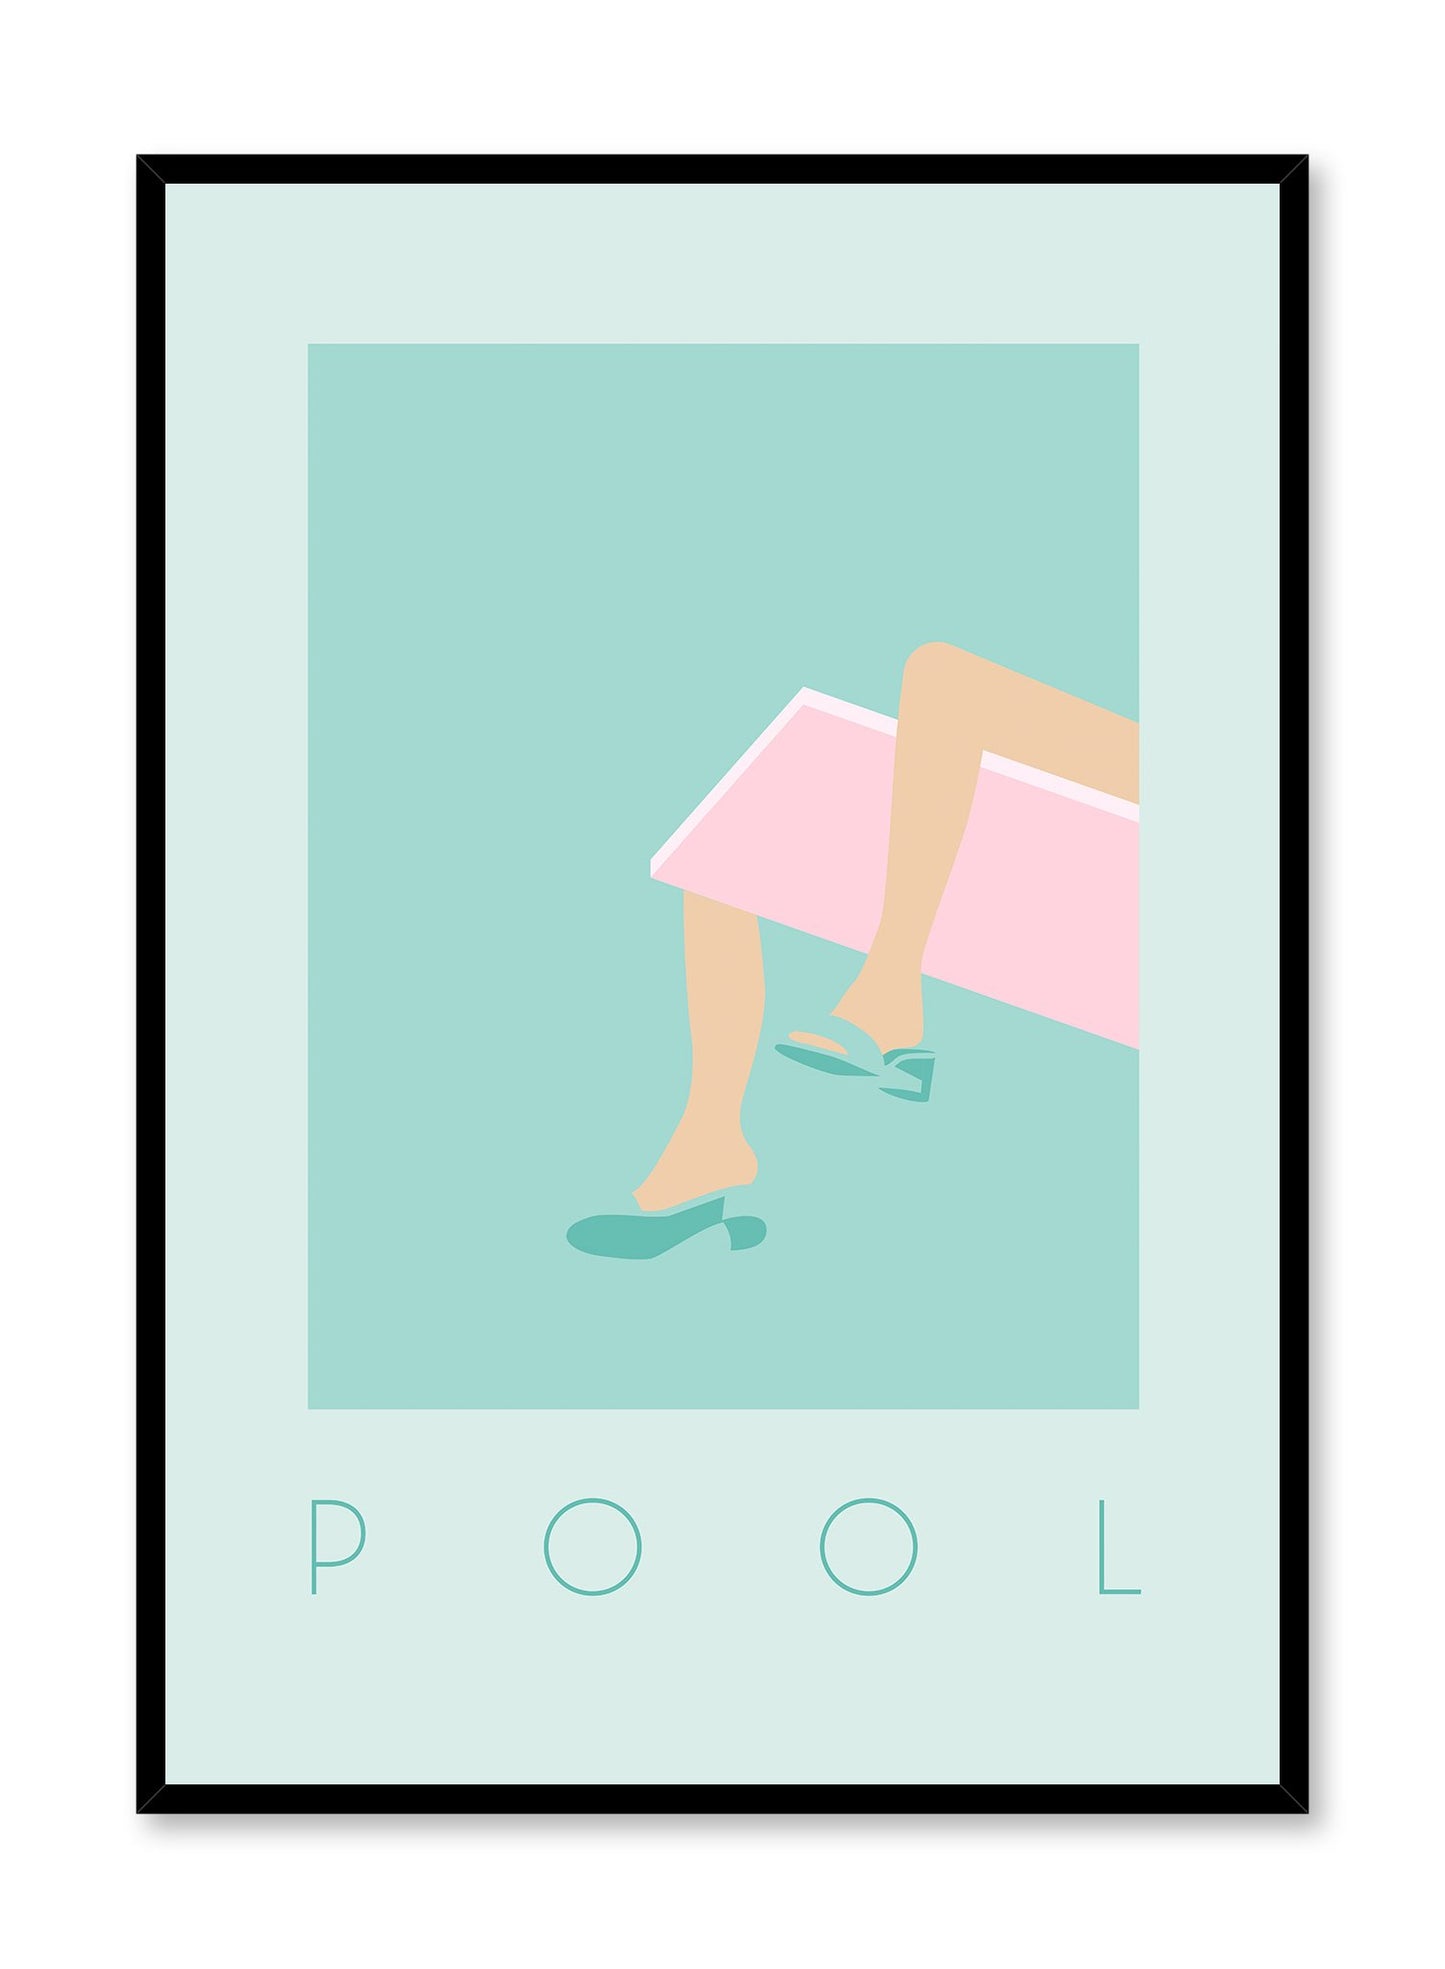 Summer Throne is a minimalist illustration poster of a woman wearing high heels while sitting on a diving board by Opposite Wall.